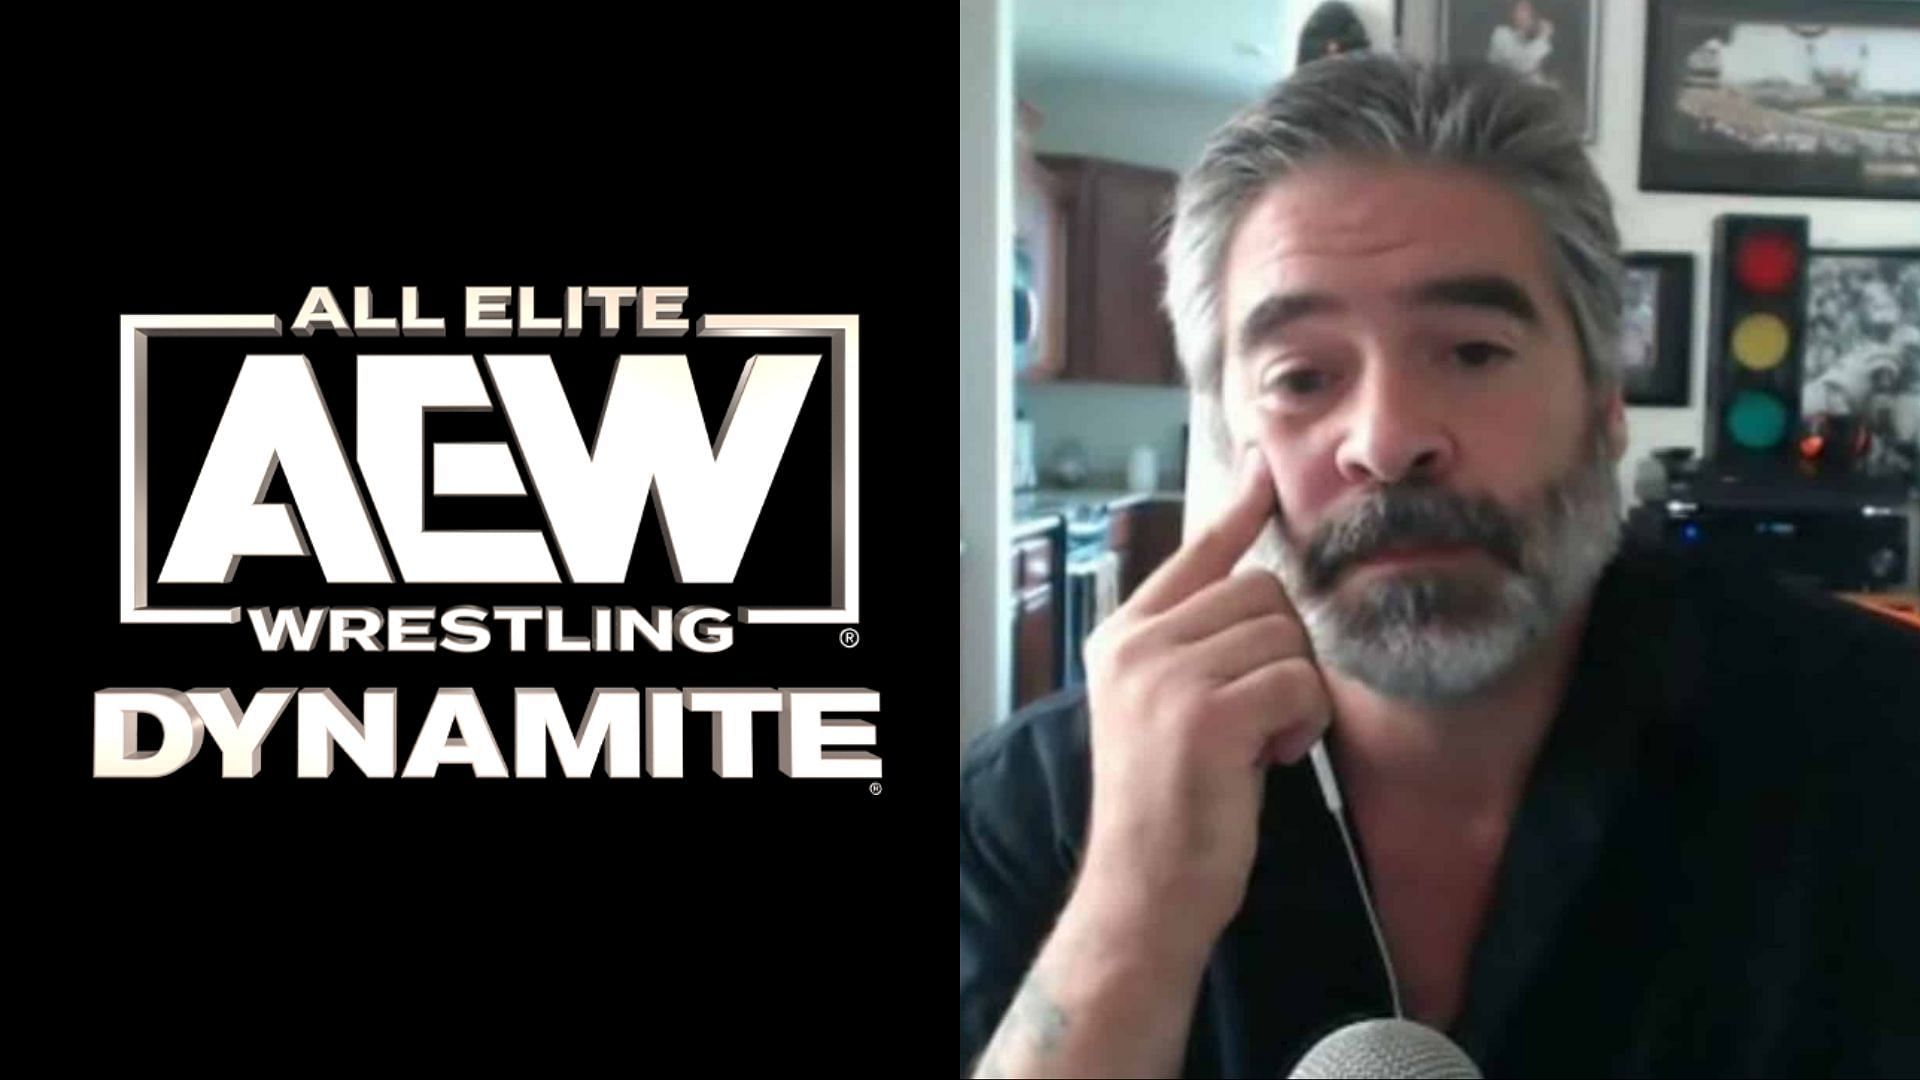 Are AEW fans as biased as Vince Russo claims?